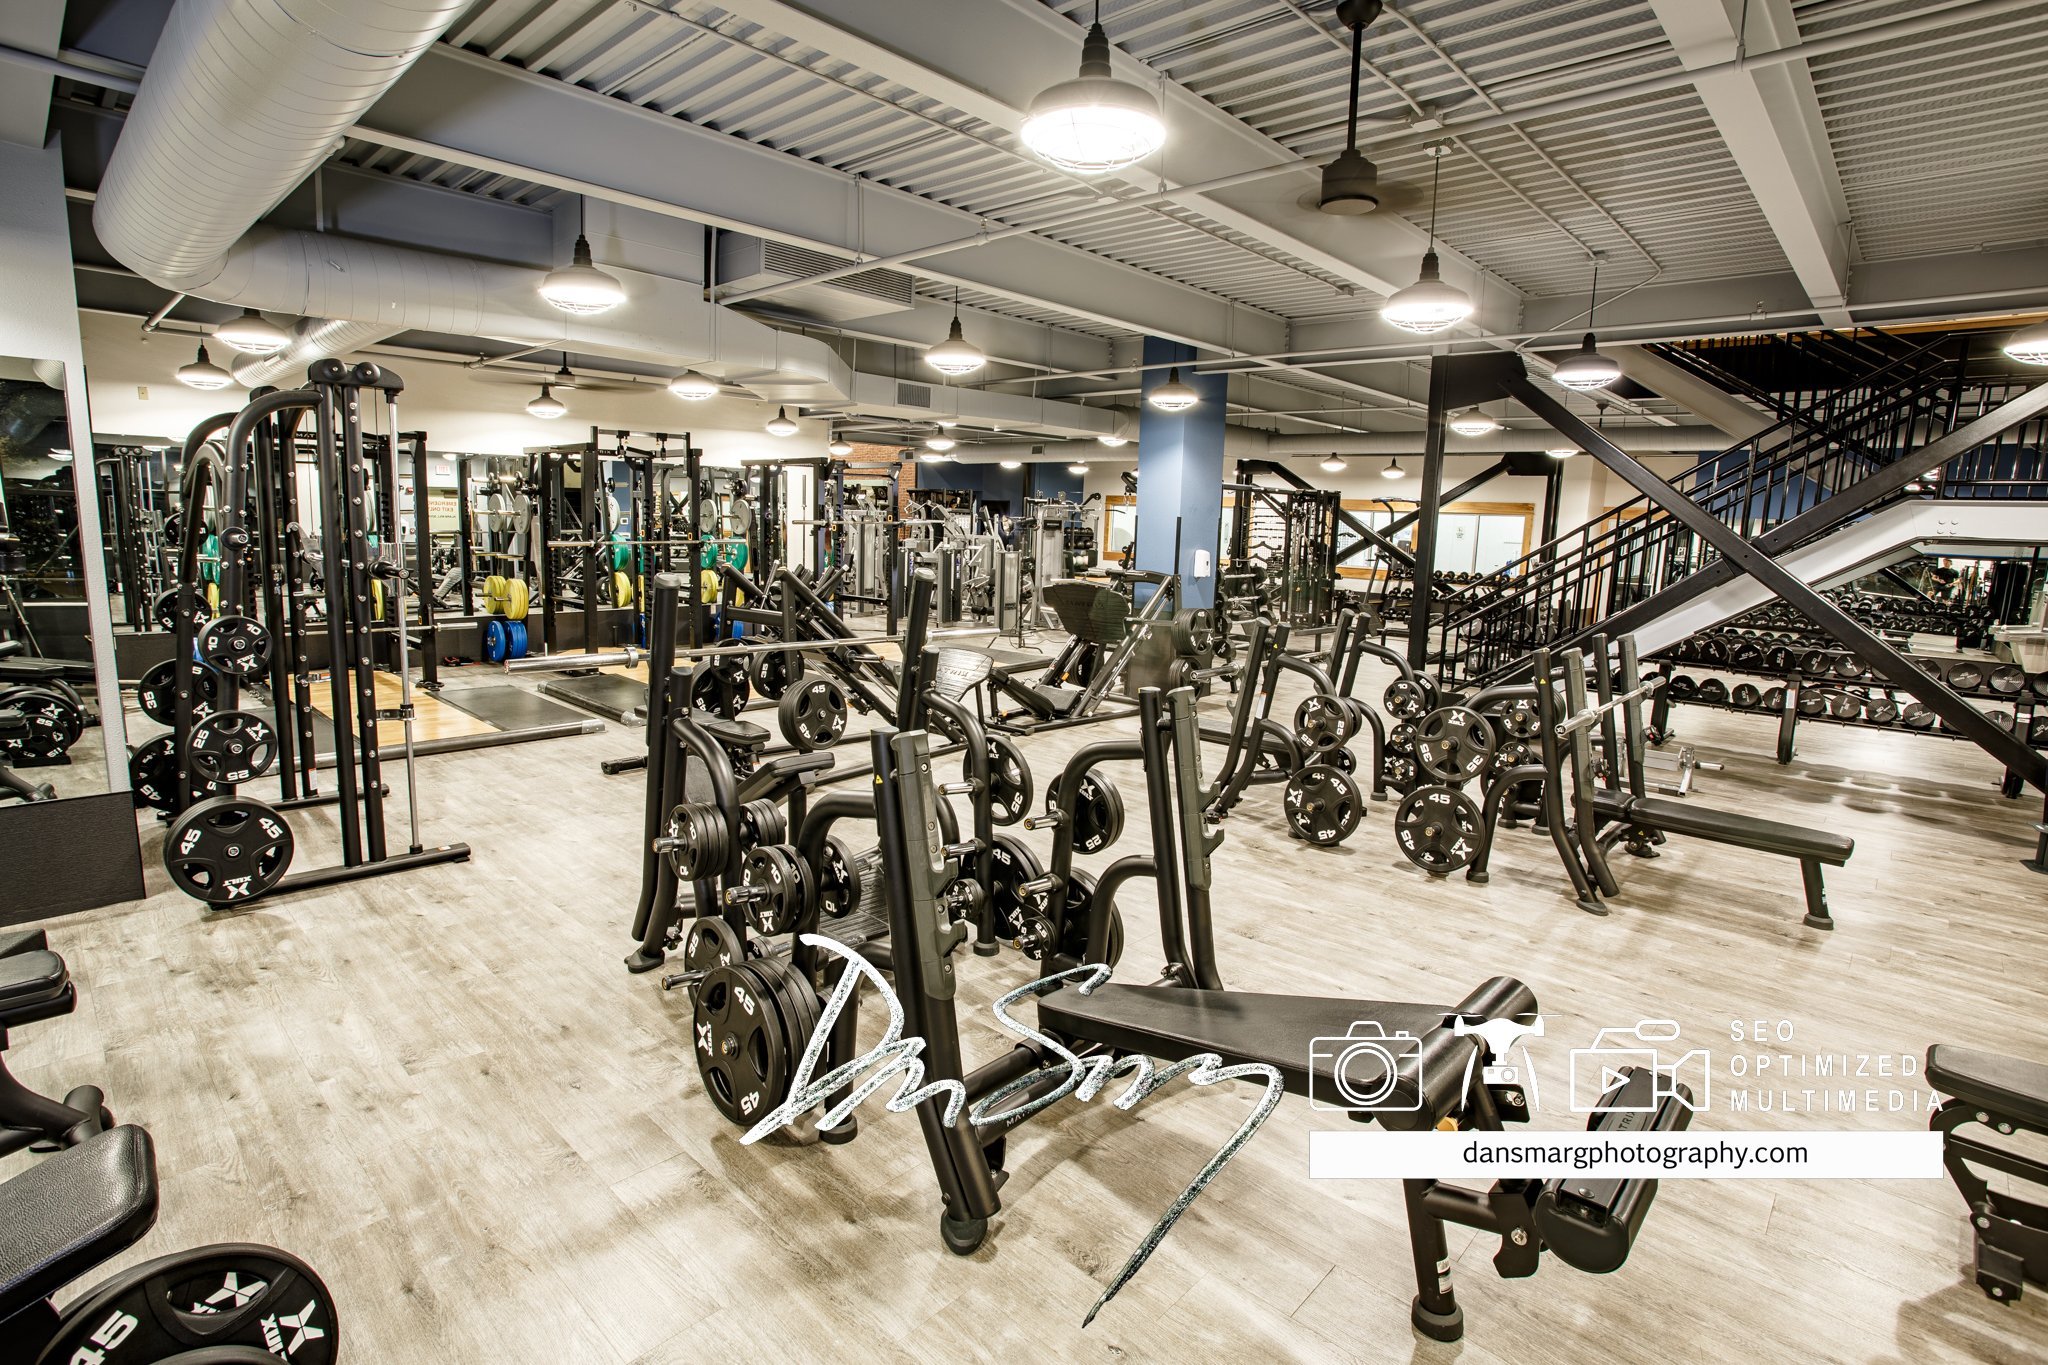 DanSmargPhotography.com-SEO-Optimmized-Multimedia-Content-The-Wave-Fitness-Center-Whitefish-Montana-25.jpg